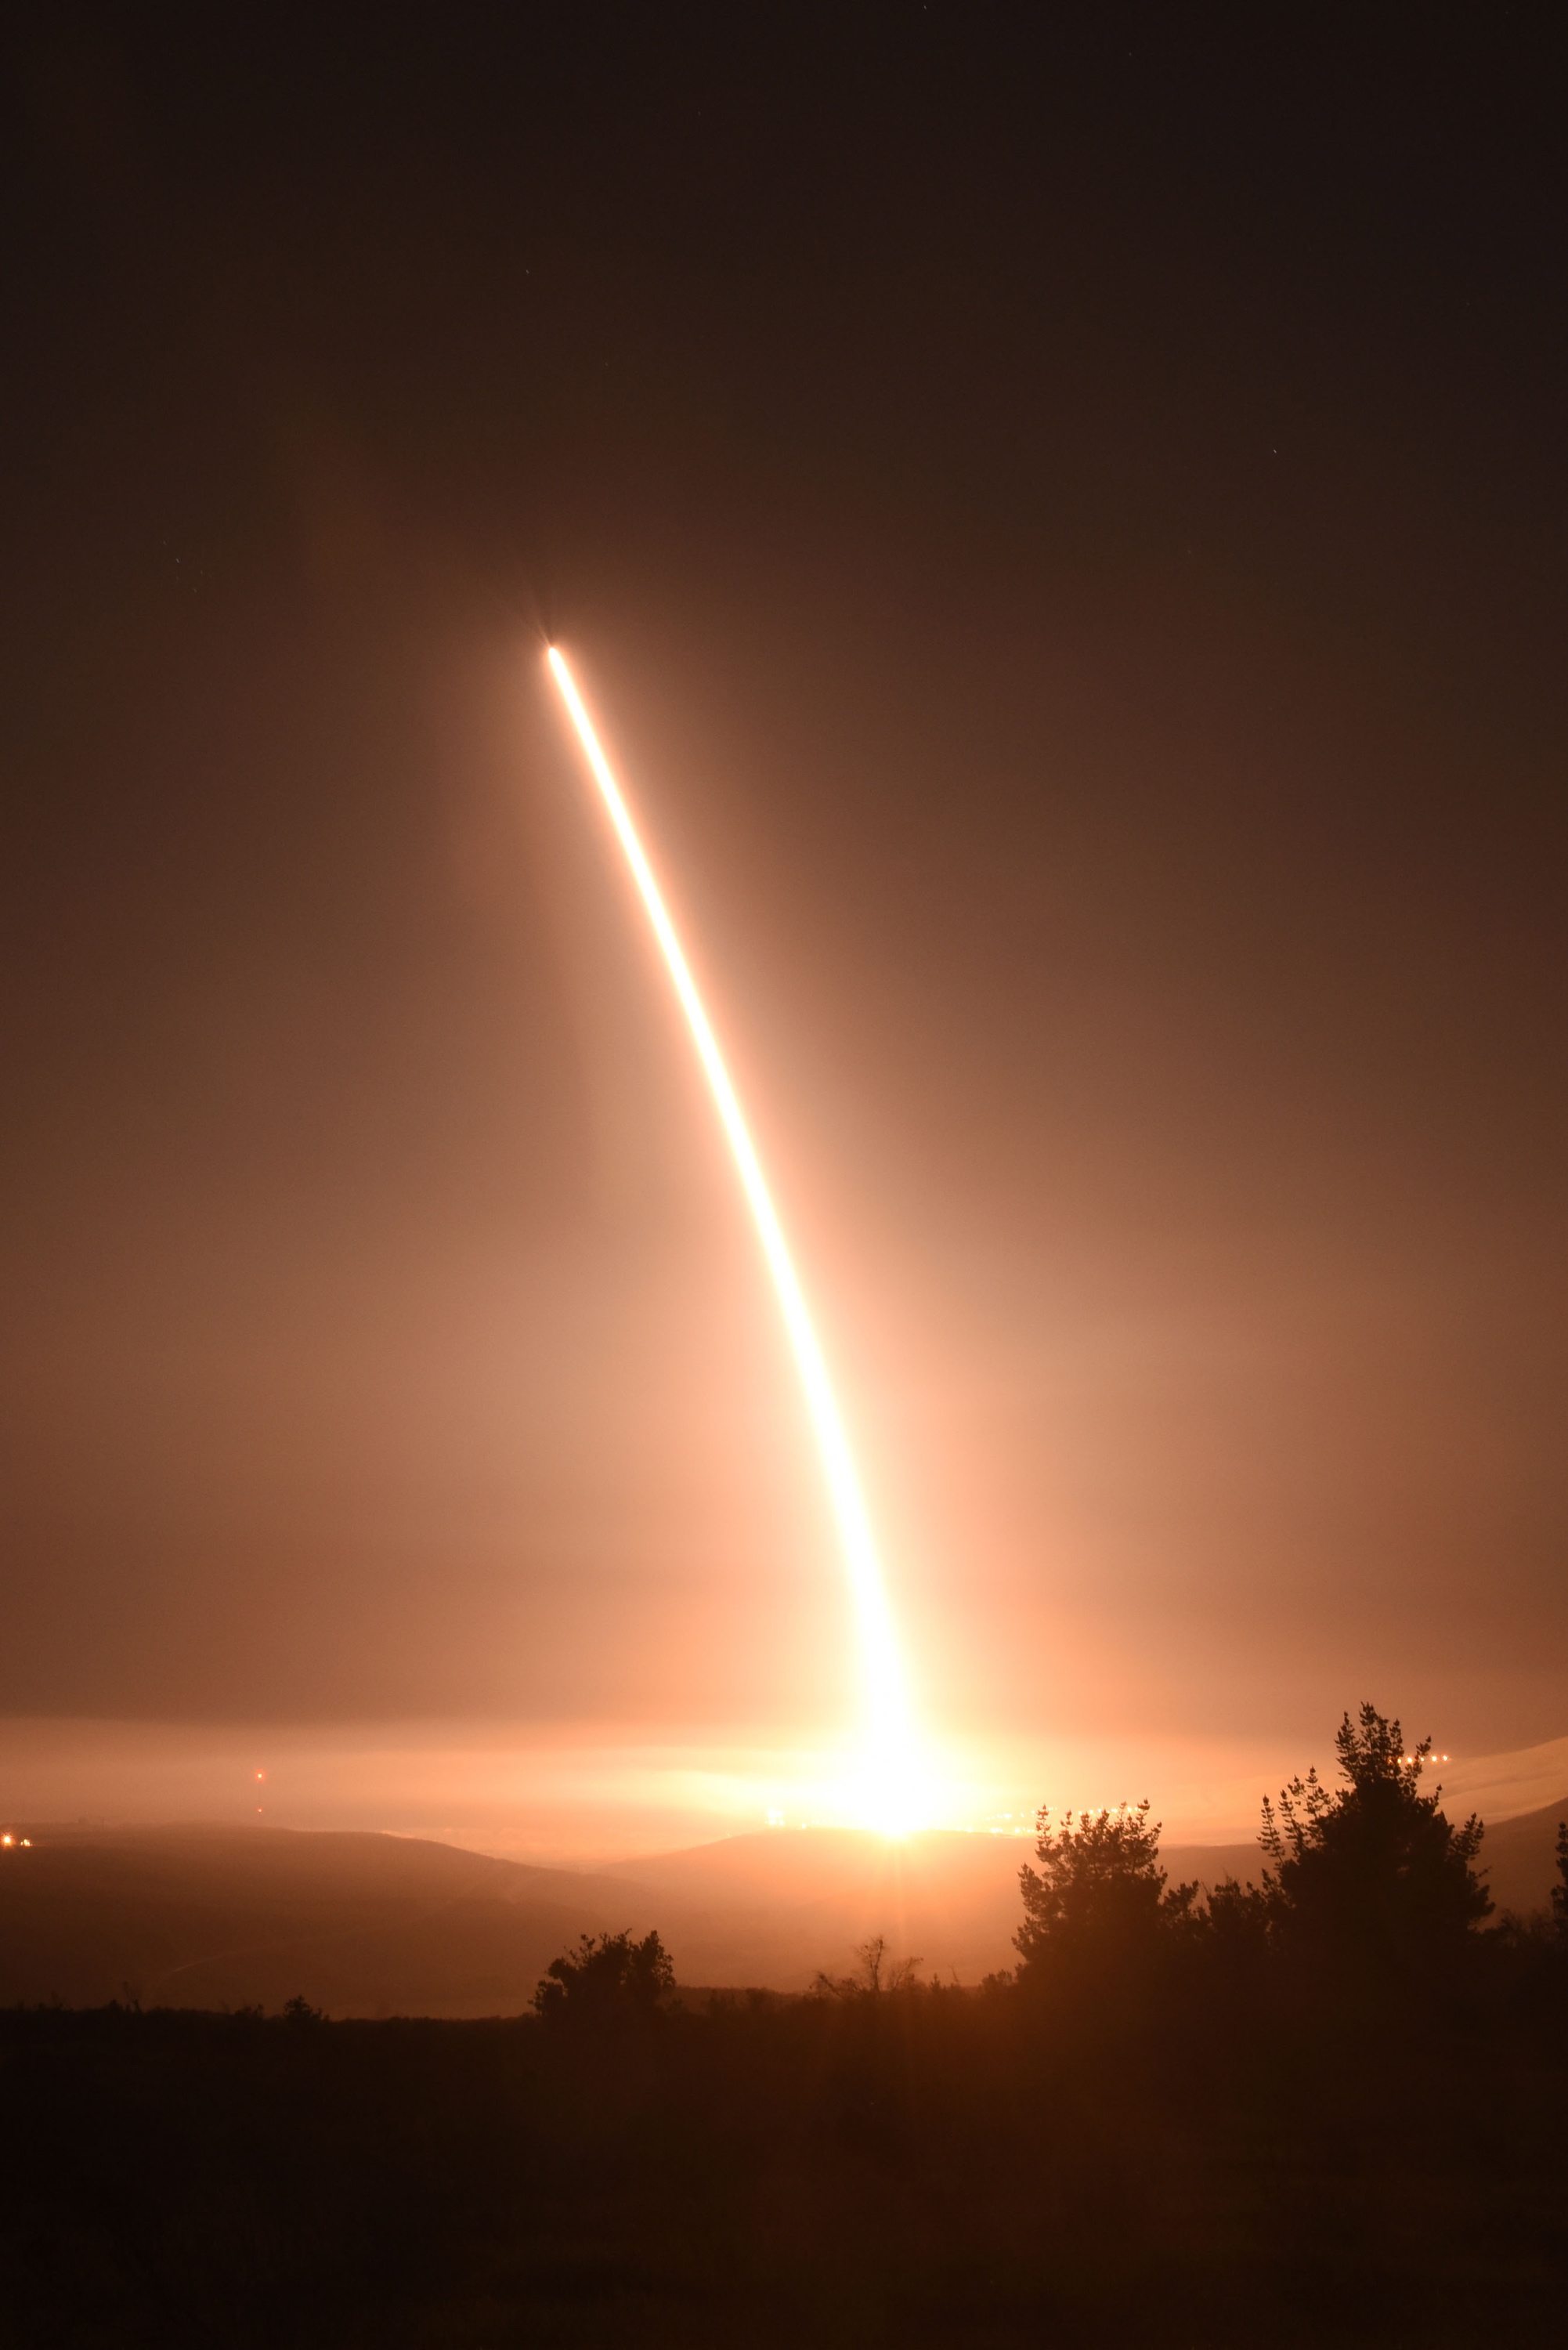 An unarmed Minuteman 3 intercontinental ballistic missile launches Thursday during an operational test from Vandenberg Air Force Base, Calif. (STAFF SGT. JIM ARAOS/U.S.